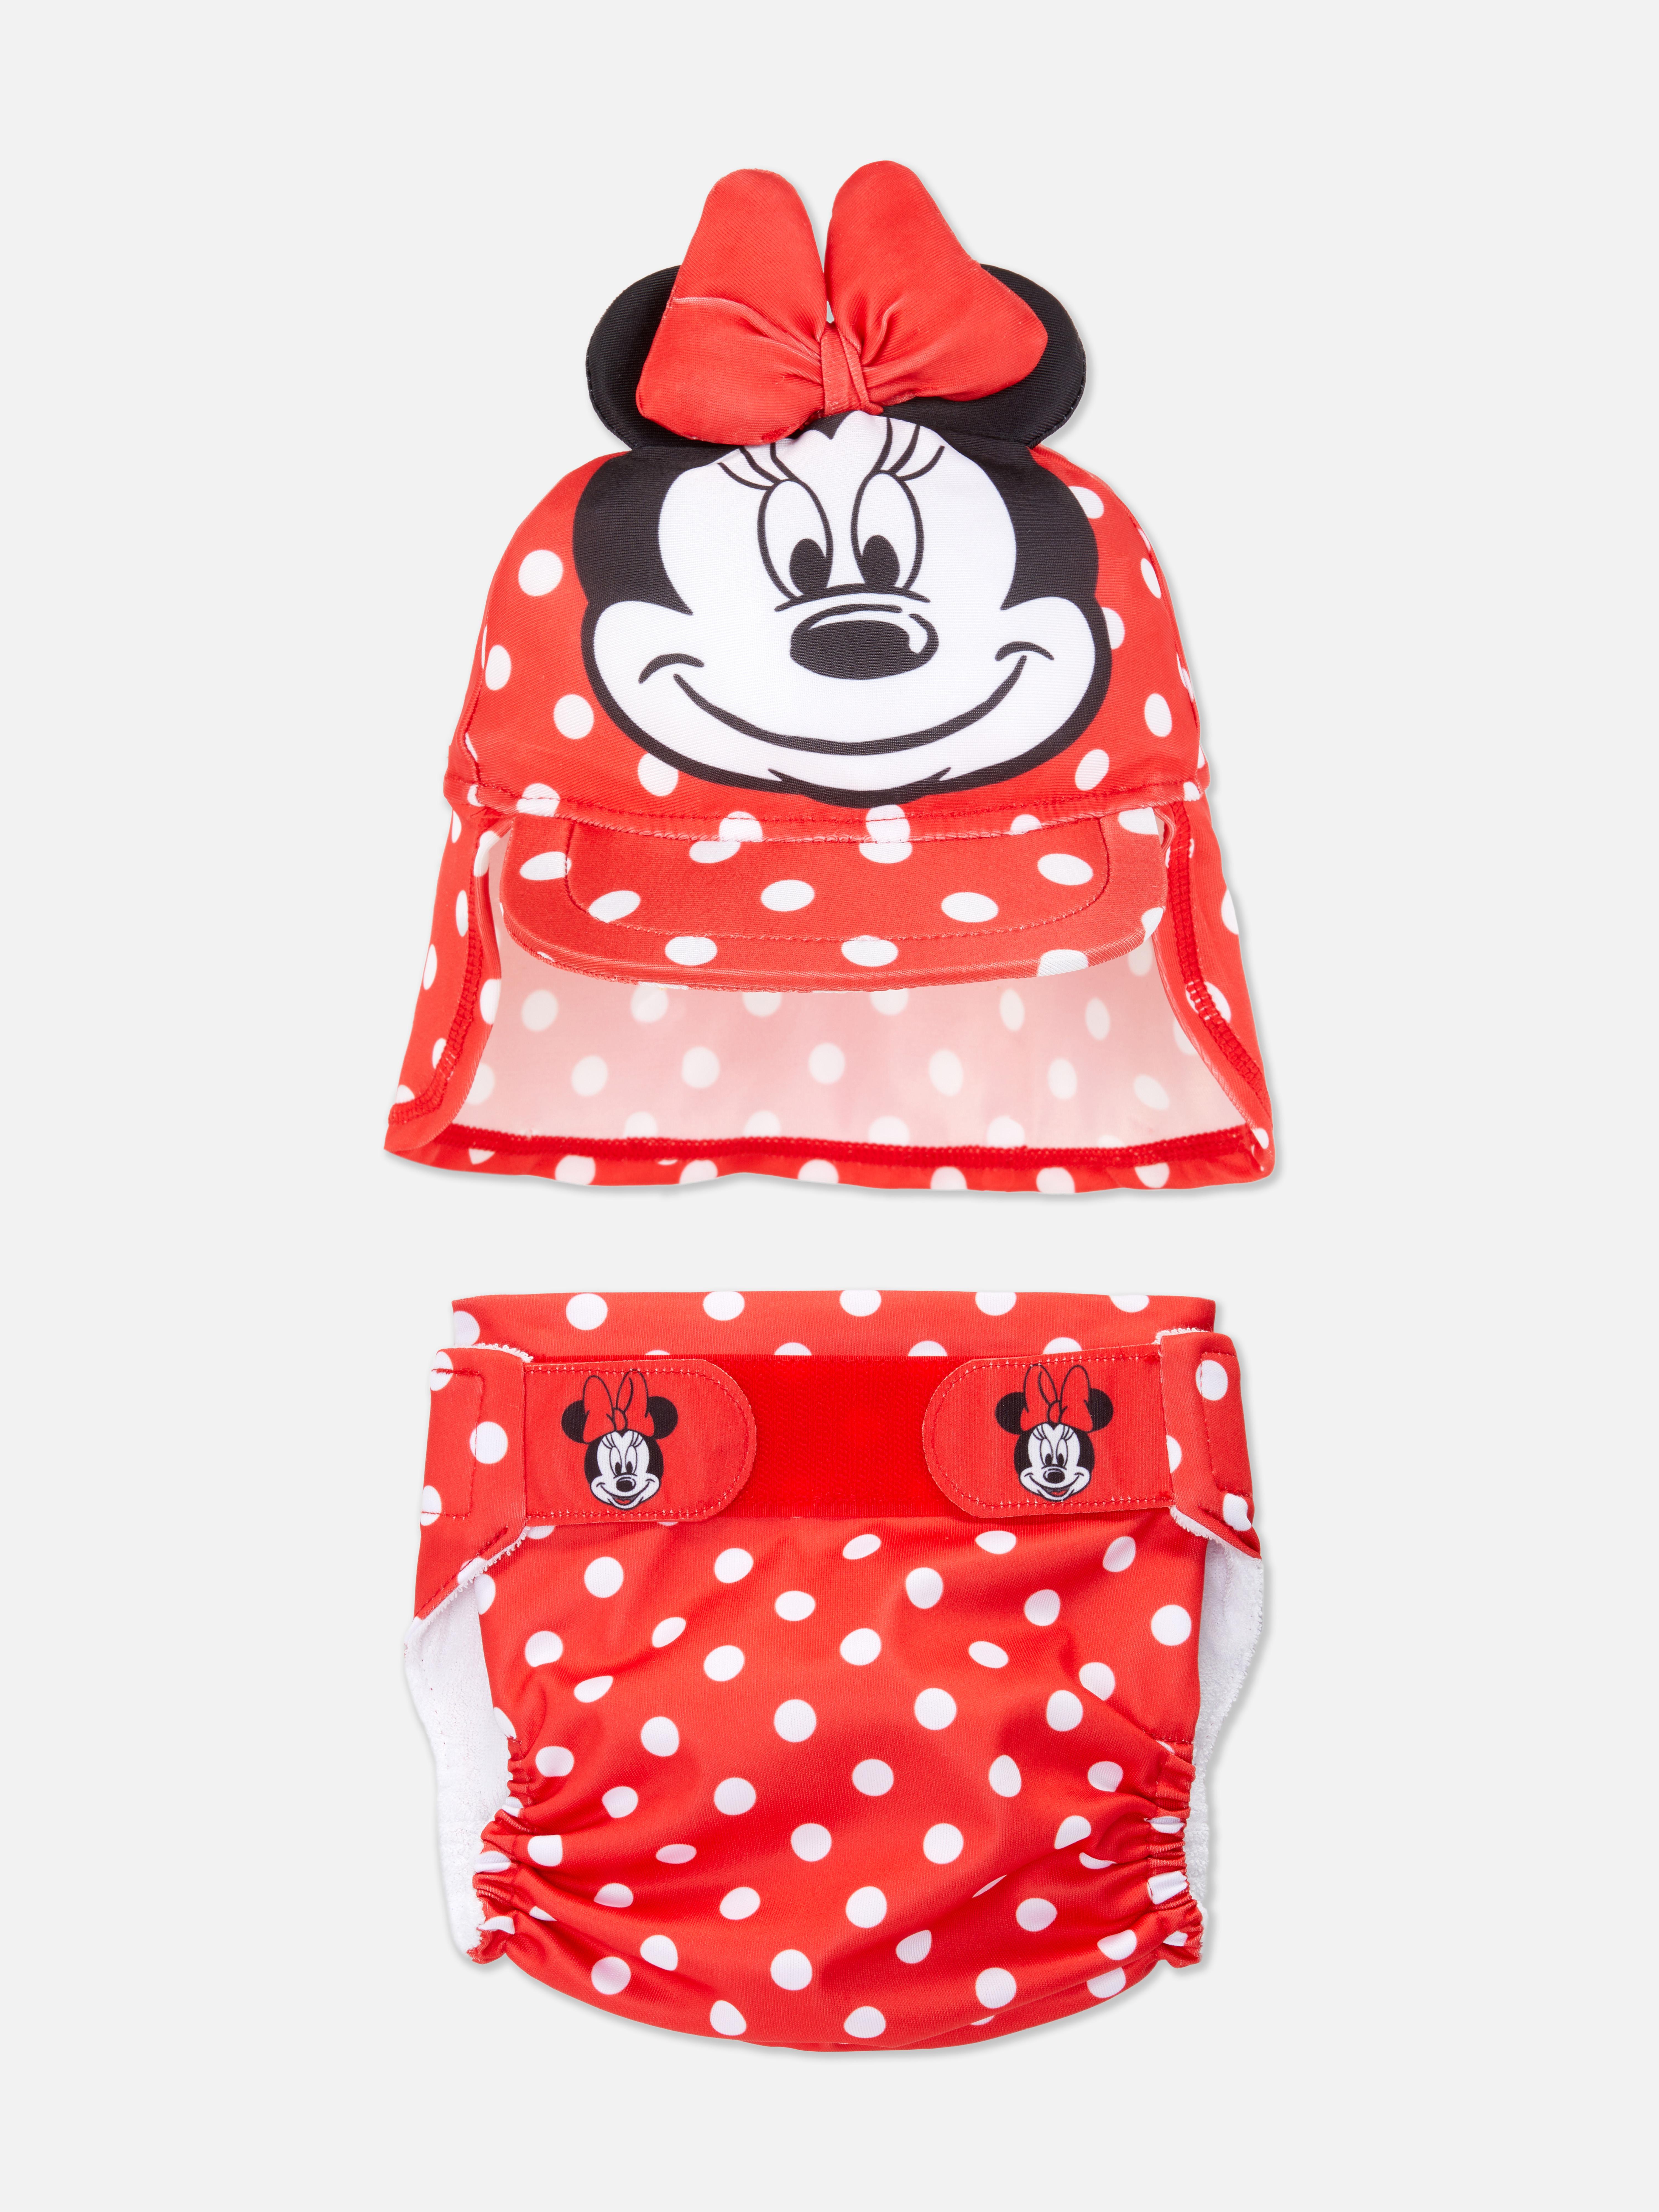 Disney’s Minnie Mouse Reusable Swim Nappy and Hat